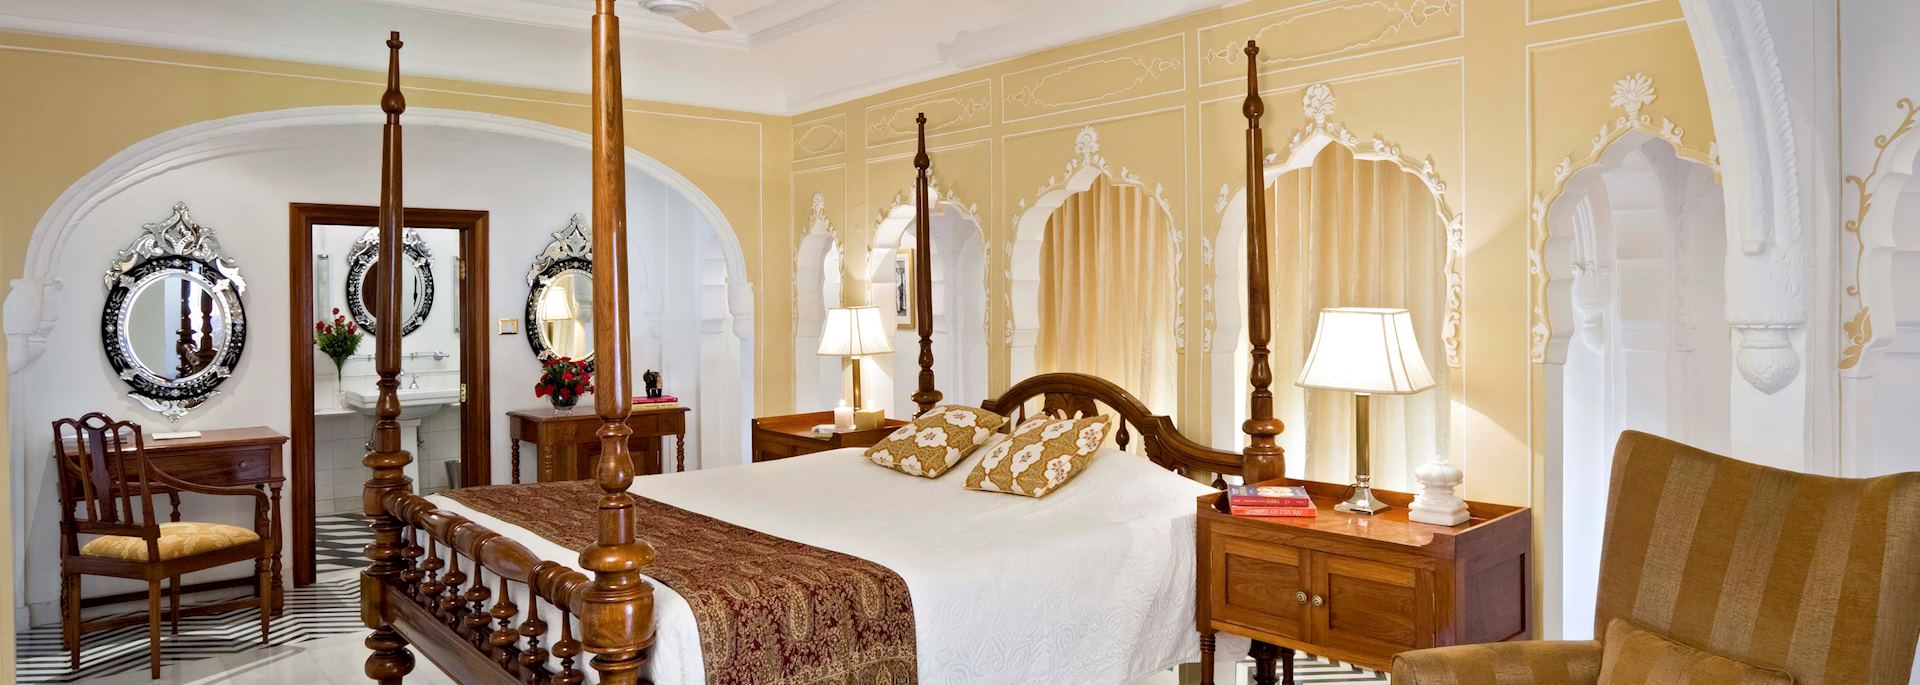 Deluxe room, Samode Palace